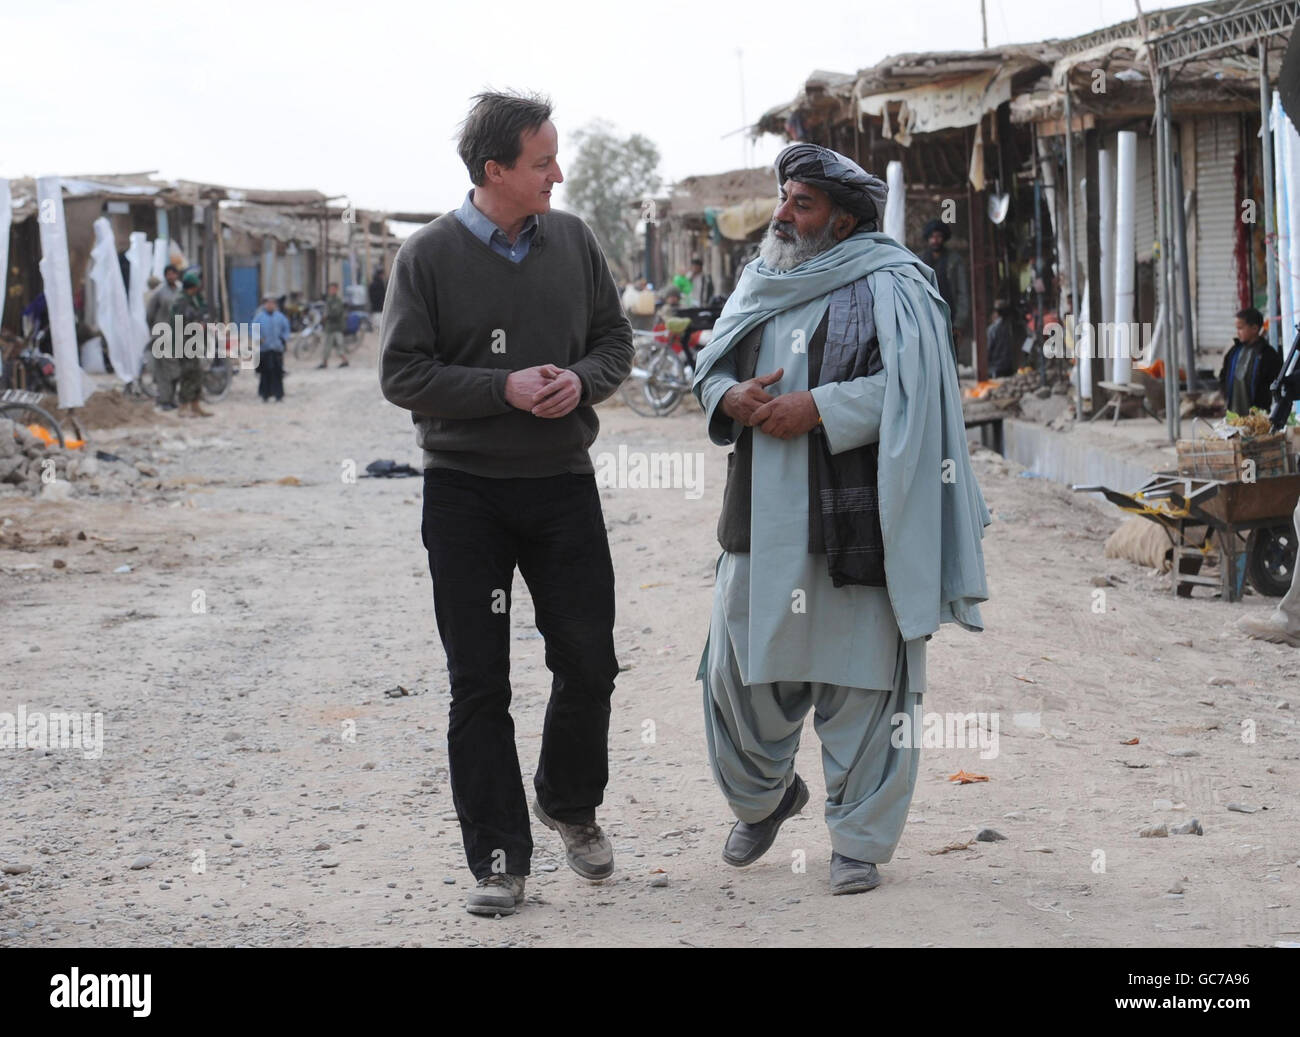 Conservative Party leader David Cameron tours the Nad-e-Ali district centre bazaar with Governor Habibullah and meets local people where 53 new shops are to built along with a covered market funded by the British government. Stock Photo